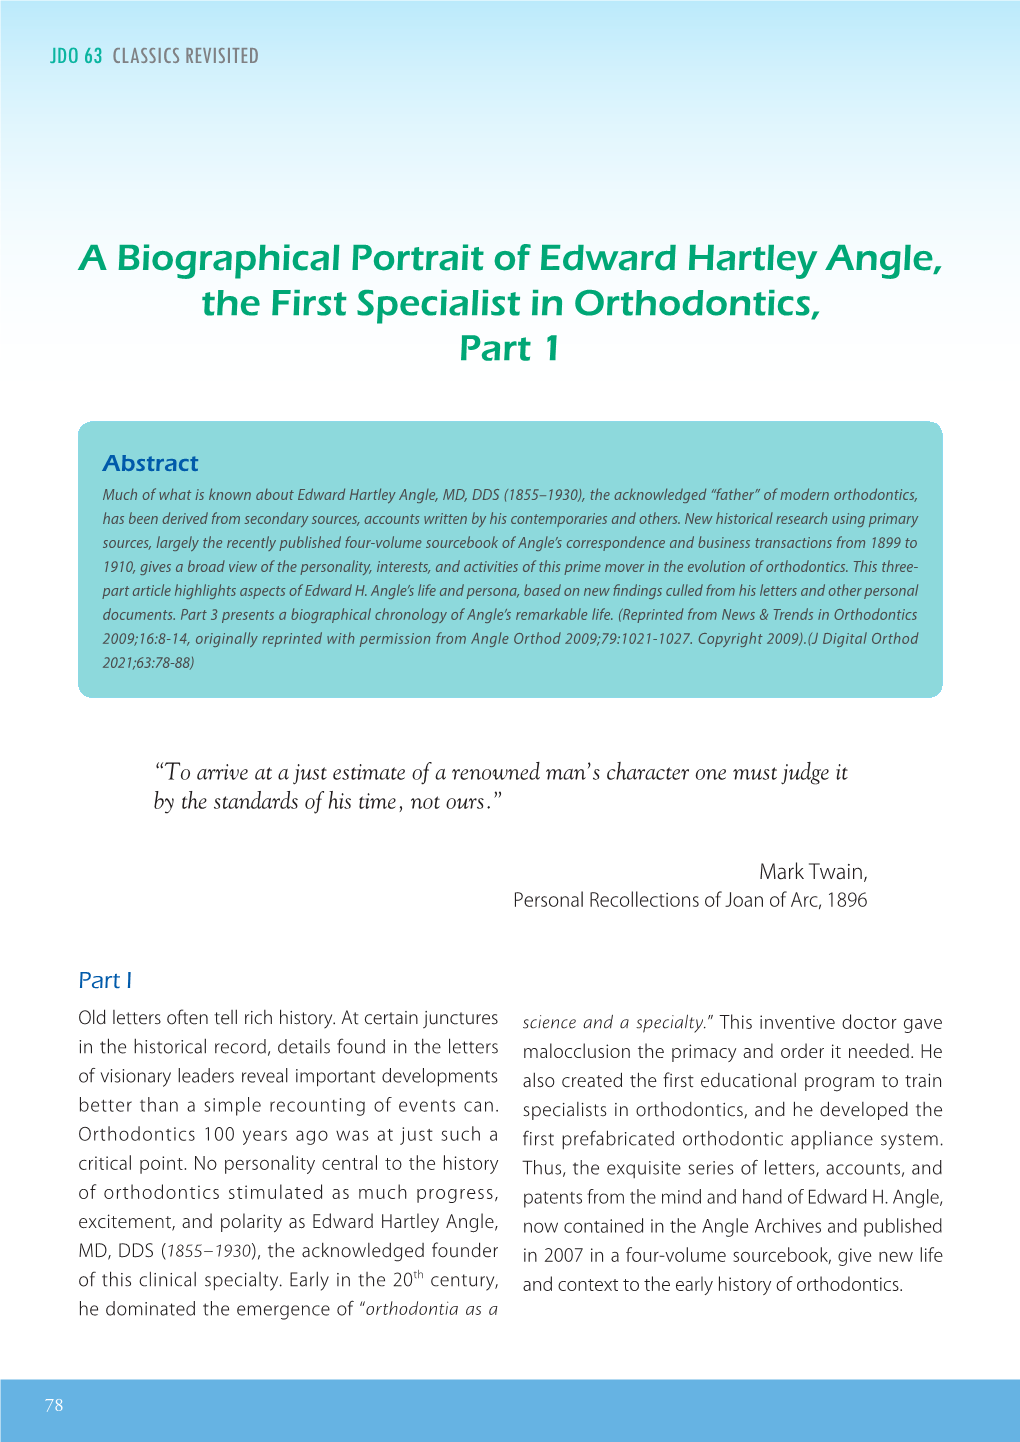 A Biographical Portrait of Edward Hartley Angle, the First Specialist in Orthodontics, Part 1